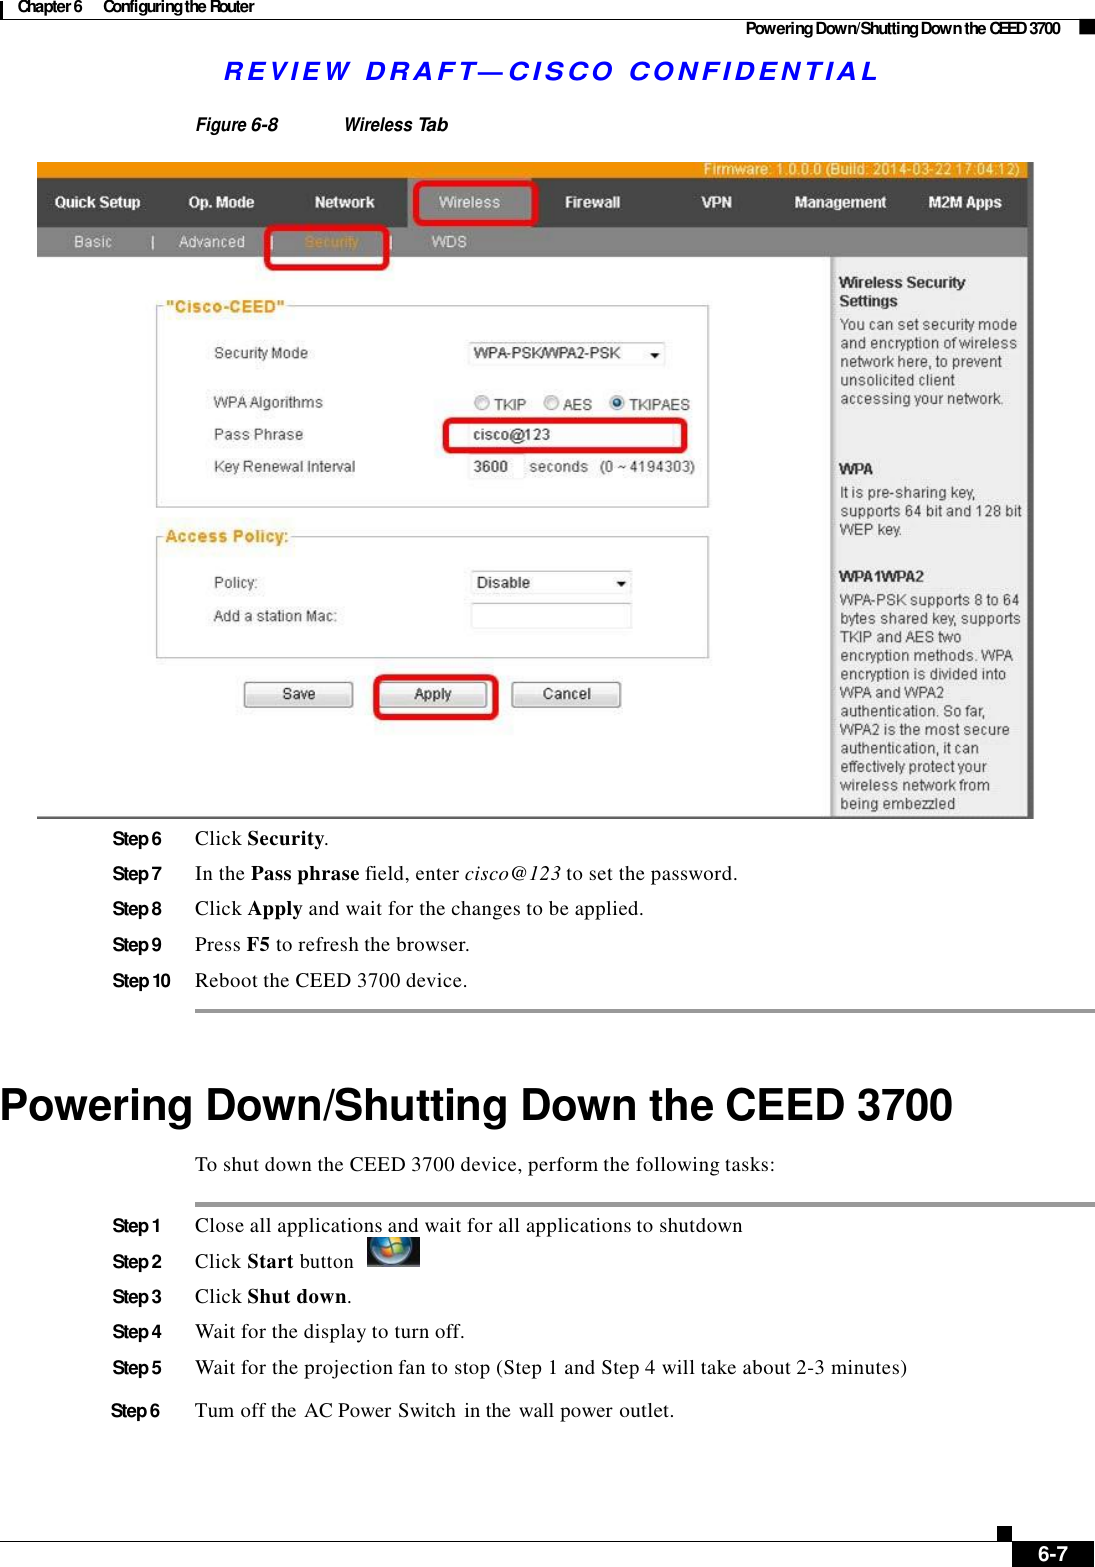 Chapter 6  Configuring the Router Powering Down/Shutting Down the CEED 3700 R E V I E W  DR AFT — CISC O  C O NF IDE N TIAL    Figure 6-8 Wireless Tab   Step 6  Click Security.  Step 7  In the Pass phrase field, enter cisco@123 to set the password.  Step 8  Click Apply and wait for the changes to be applied.  Step 9  Press F5 to refresh the browser.  Step 10  Reboot the CEED 3700 device.     Powering Down/Shutting Down the CEED 3700  To shut down the CEED 3700 device, perform the following tasks:   Step 1  Close all applications and wait for all applications to shutdown Step 2 Click Start button    Step 3  Click Shut down.  Step 4  Wait for the display to turn off.  Step 5  Wait for the projection fan to stop (Step 1 and Step 4 will take about 2-3 minutes)  Step 6       Tum off the AC Power Switch  in the wall power outlet.          6-7 